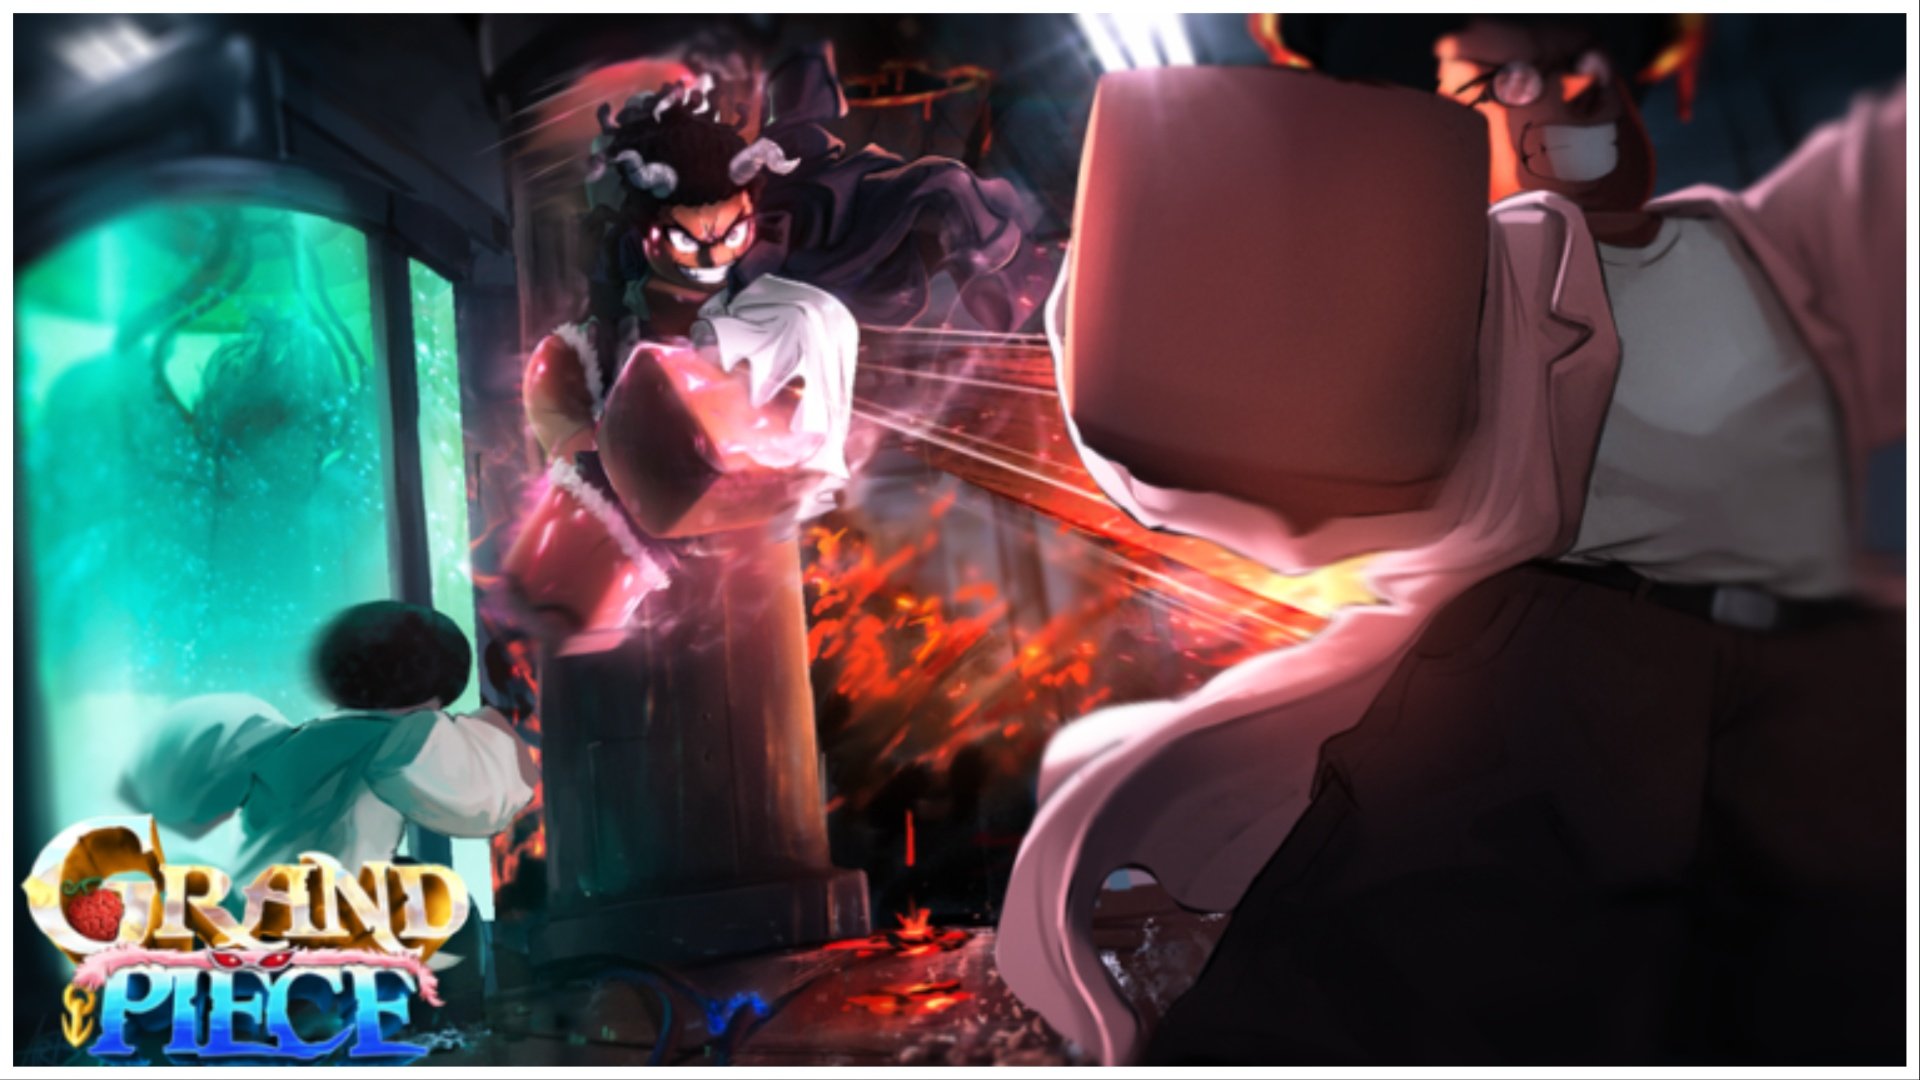 The image shows one of the illustration banners for GPO. Two characters are locked in battle in the painted roblox like style. The character we see clearly has horns and a devious expression on his face